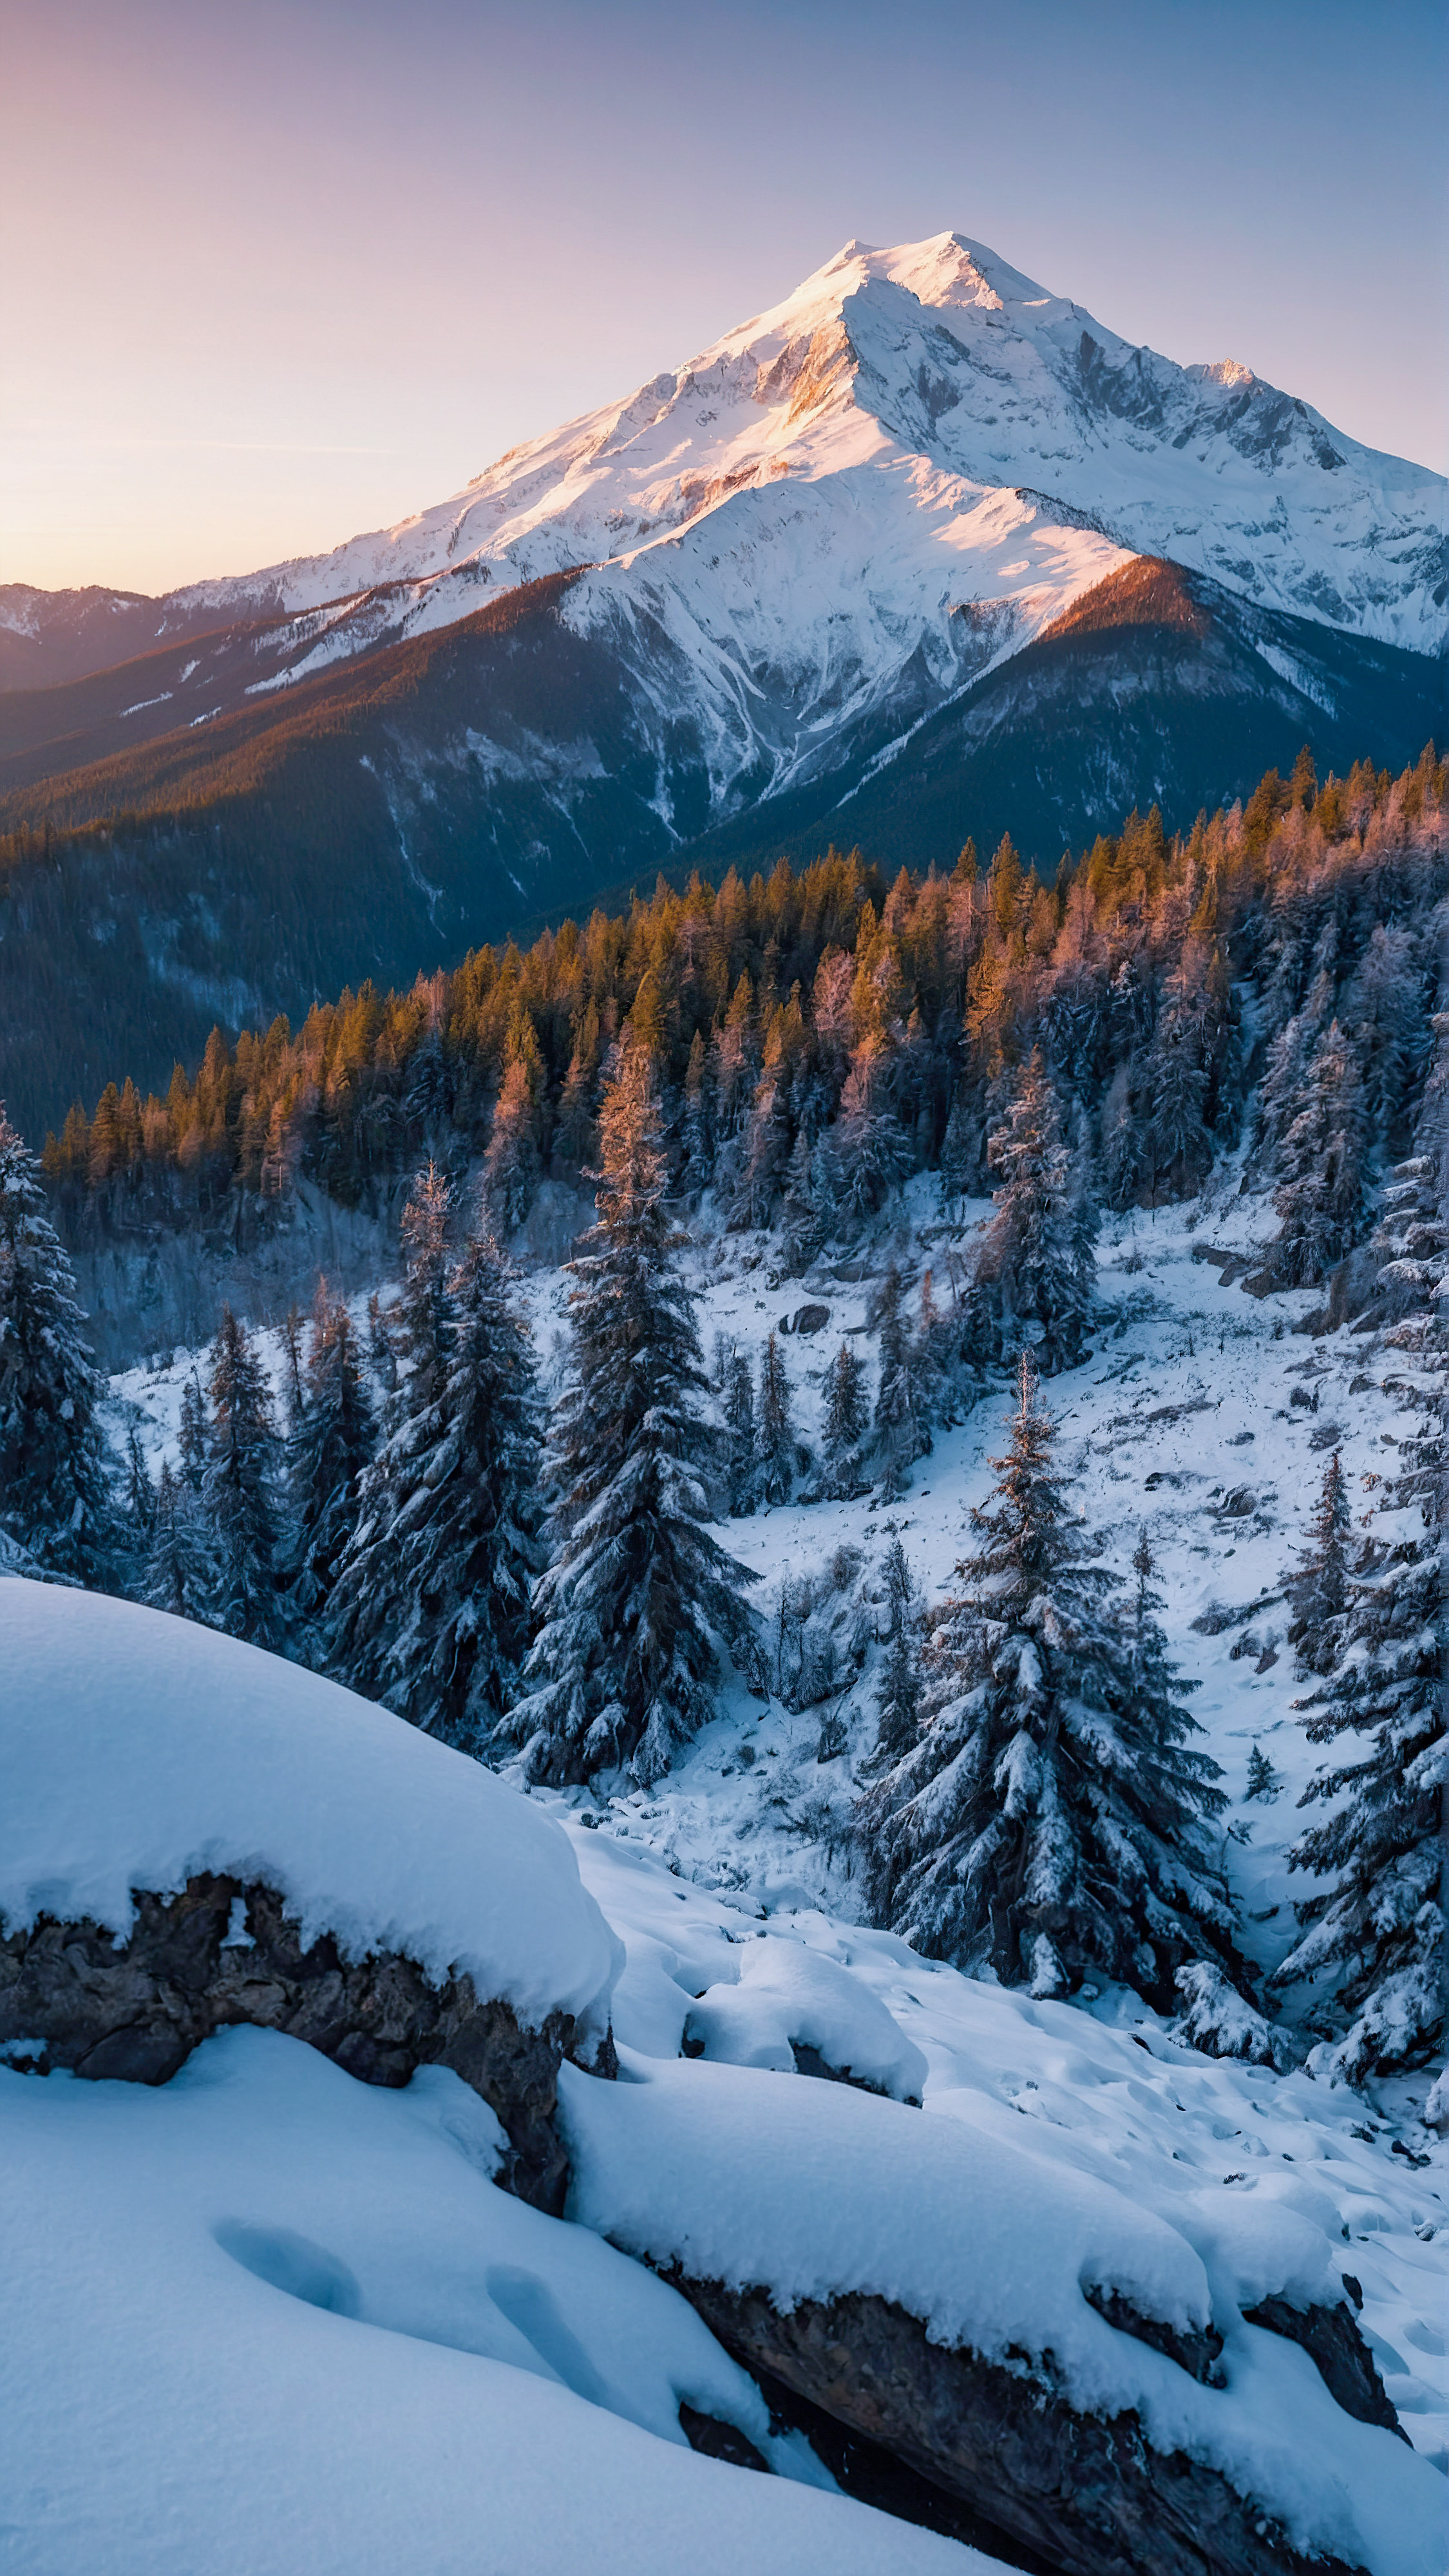 Get lost in the magic of a breathtaking view of a snow-capped mountain peak amidst a forest during sunset with our aesthetic iPhone wallpaper in 4K.